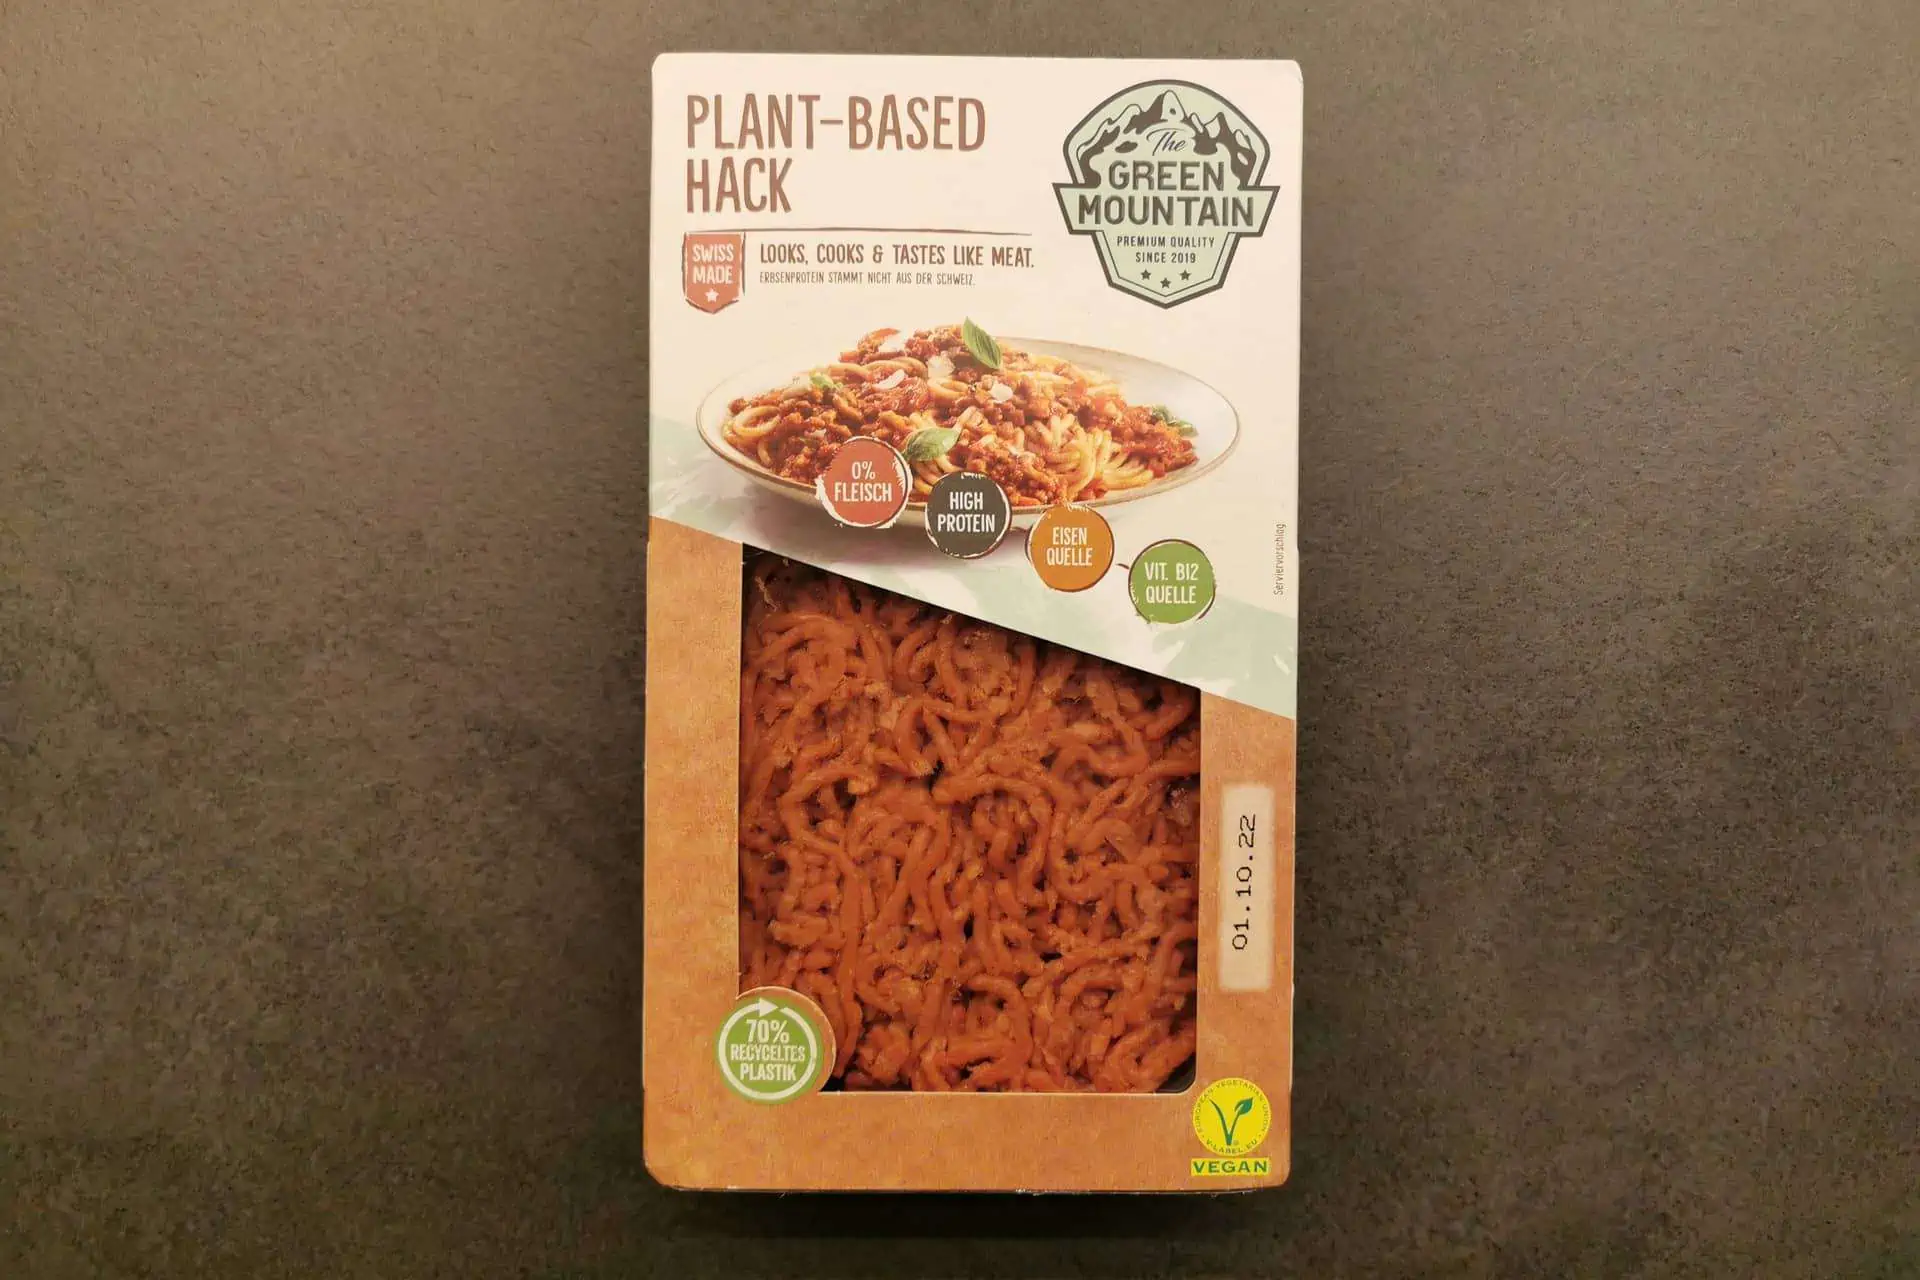 The Green Mountain - Plant-based Hack